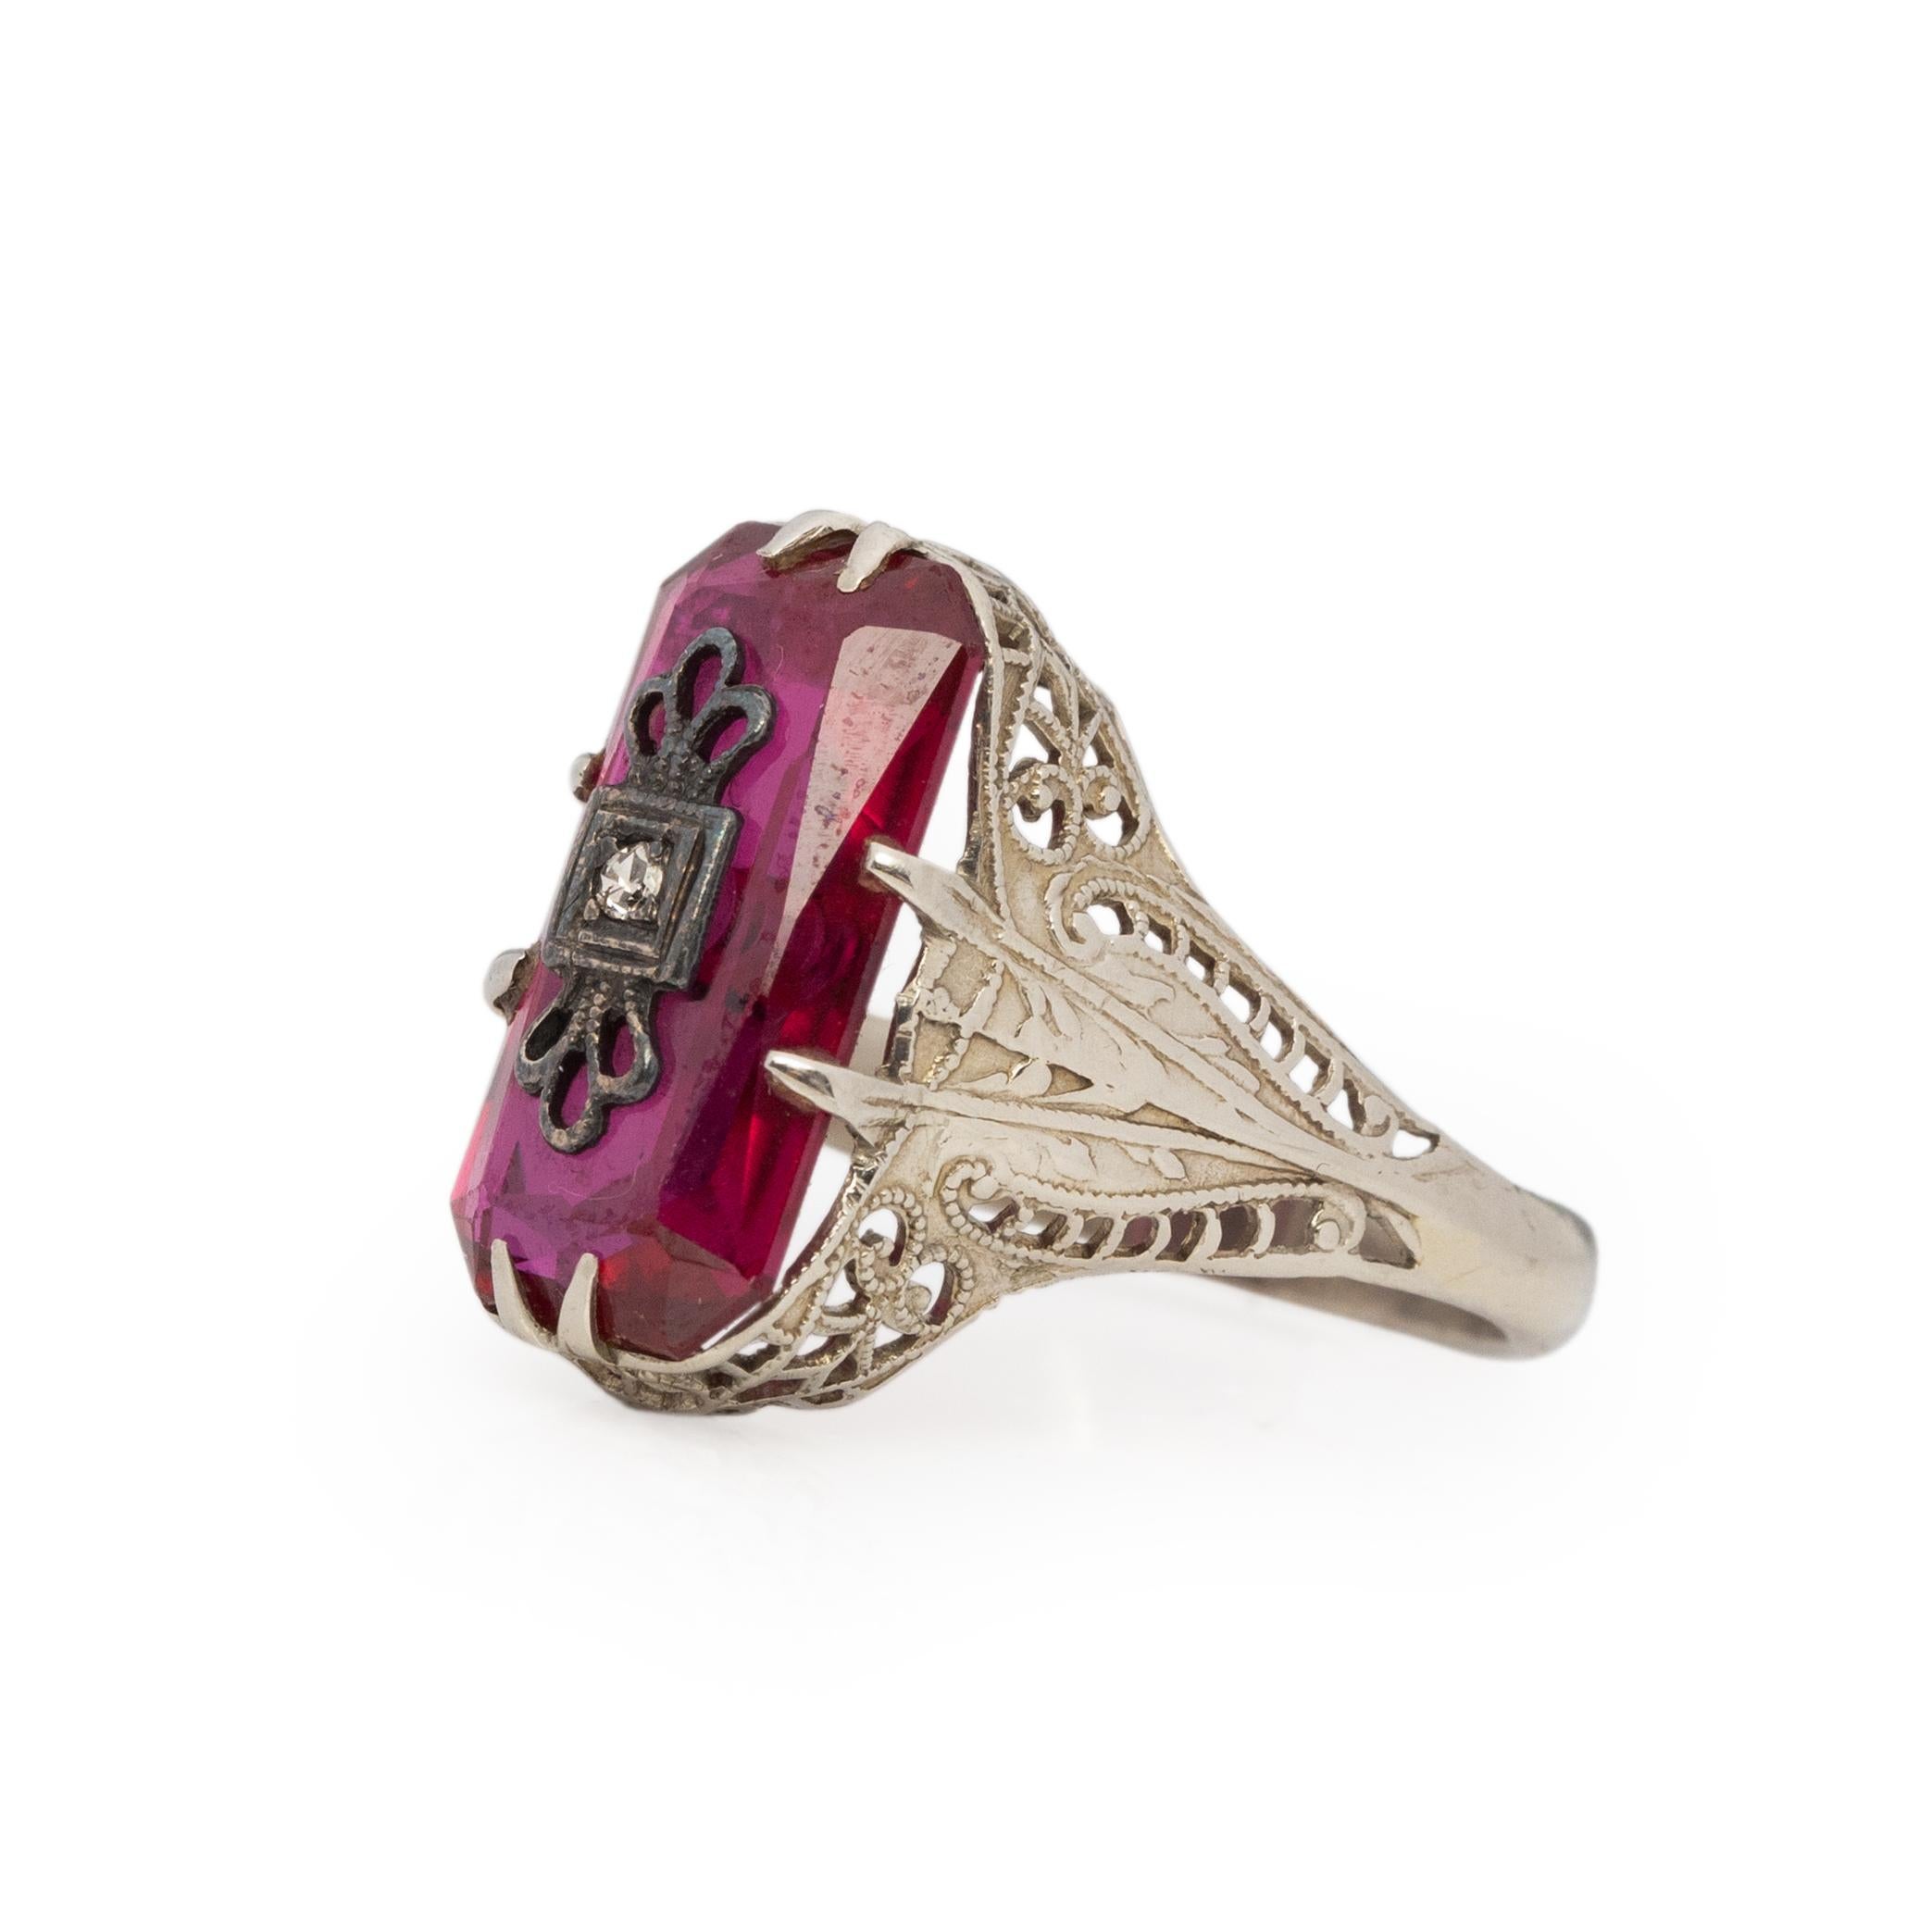 Women's or Men's Victorian 14K White Gold Antique Filigree and Red Stone Statement Ring